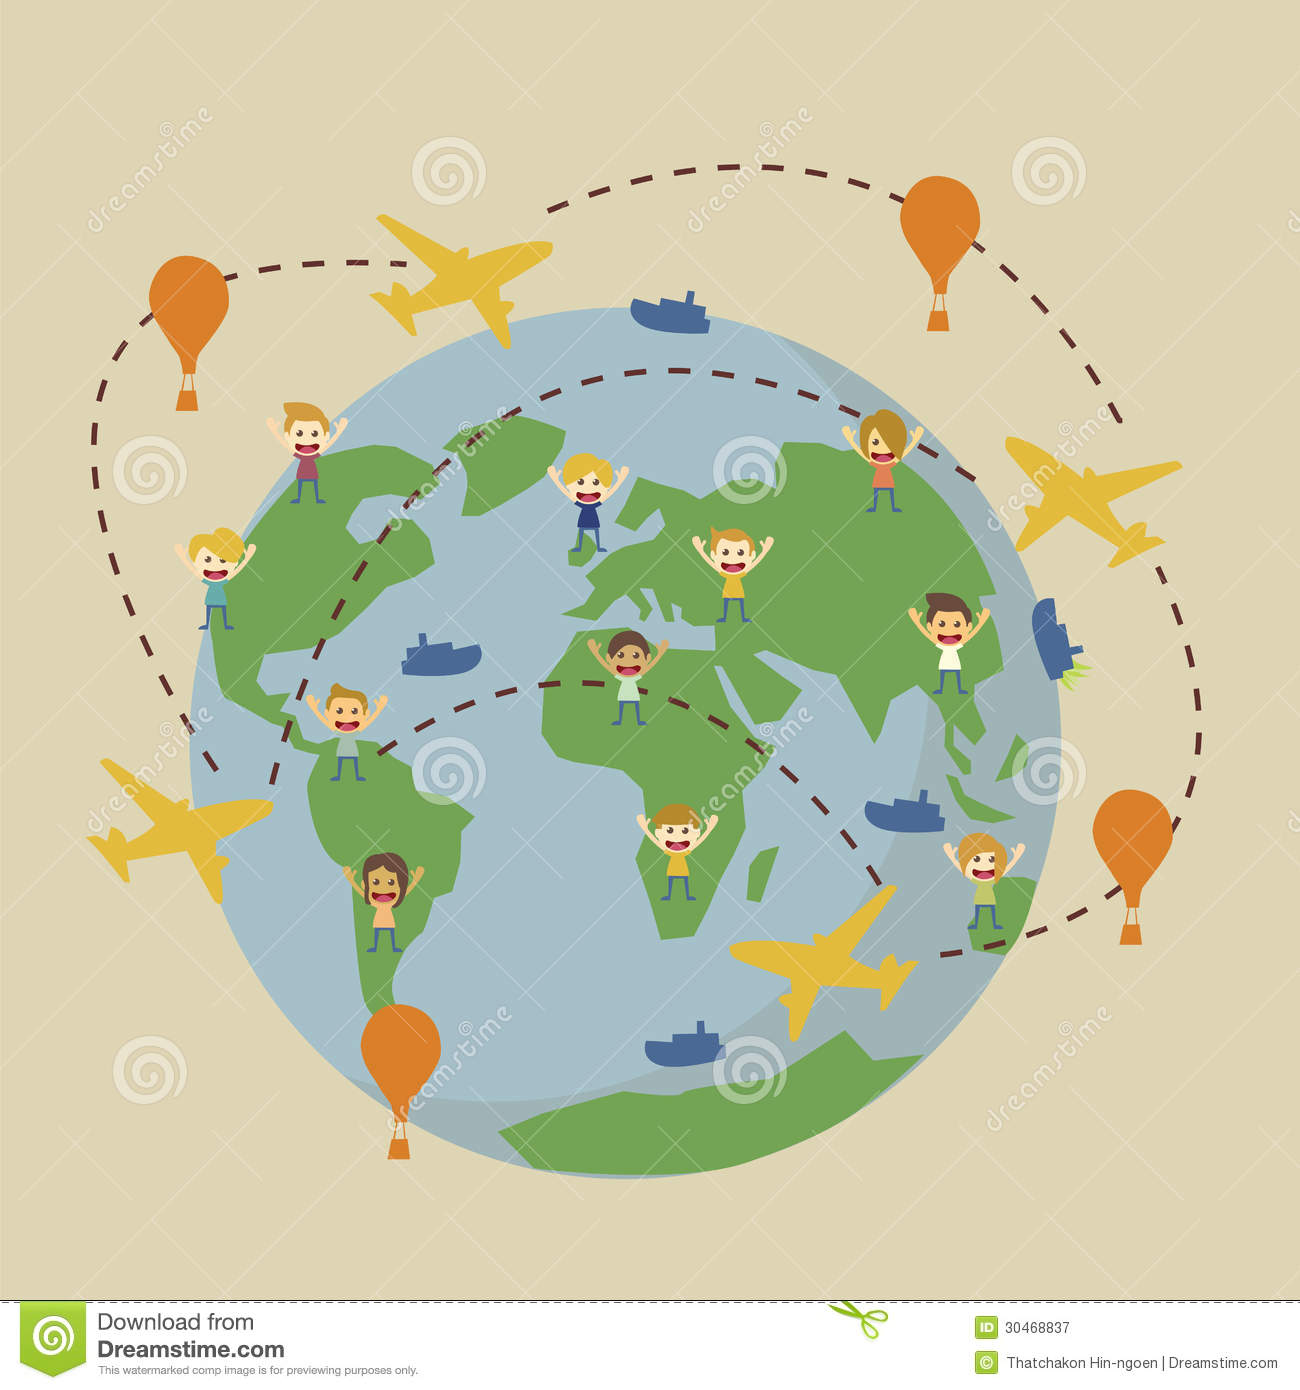 World Travels Map with Airplanes